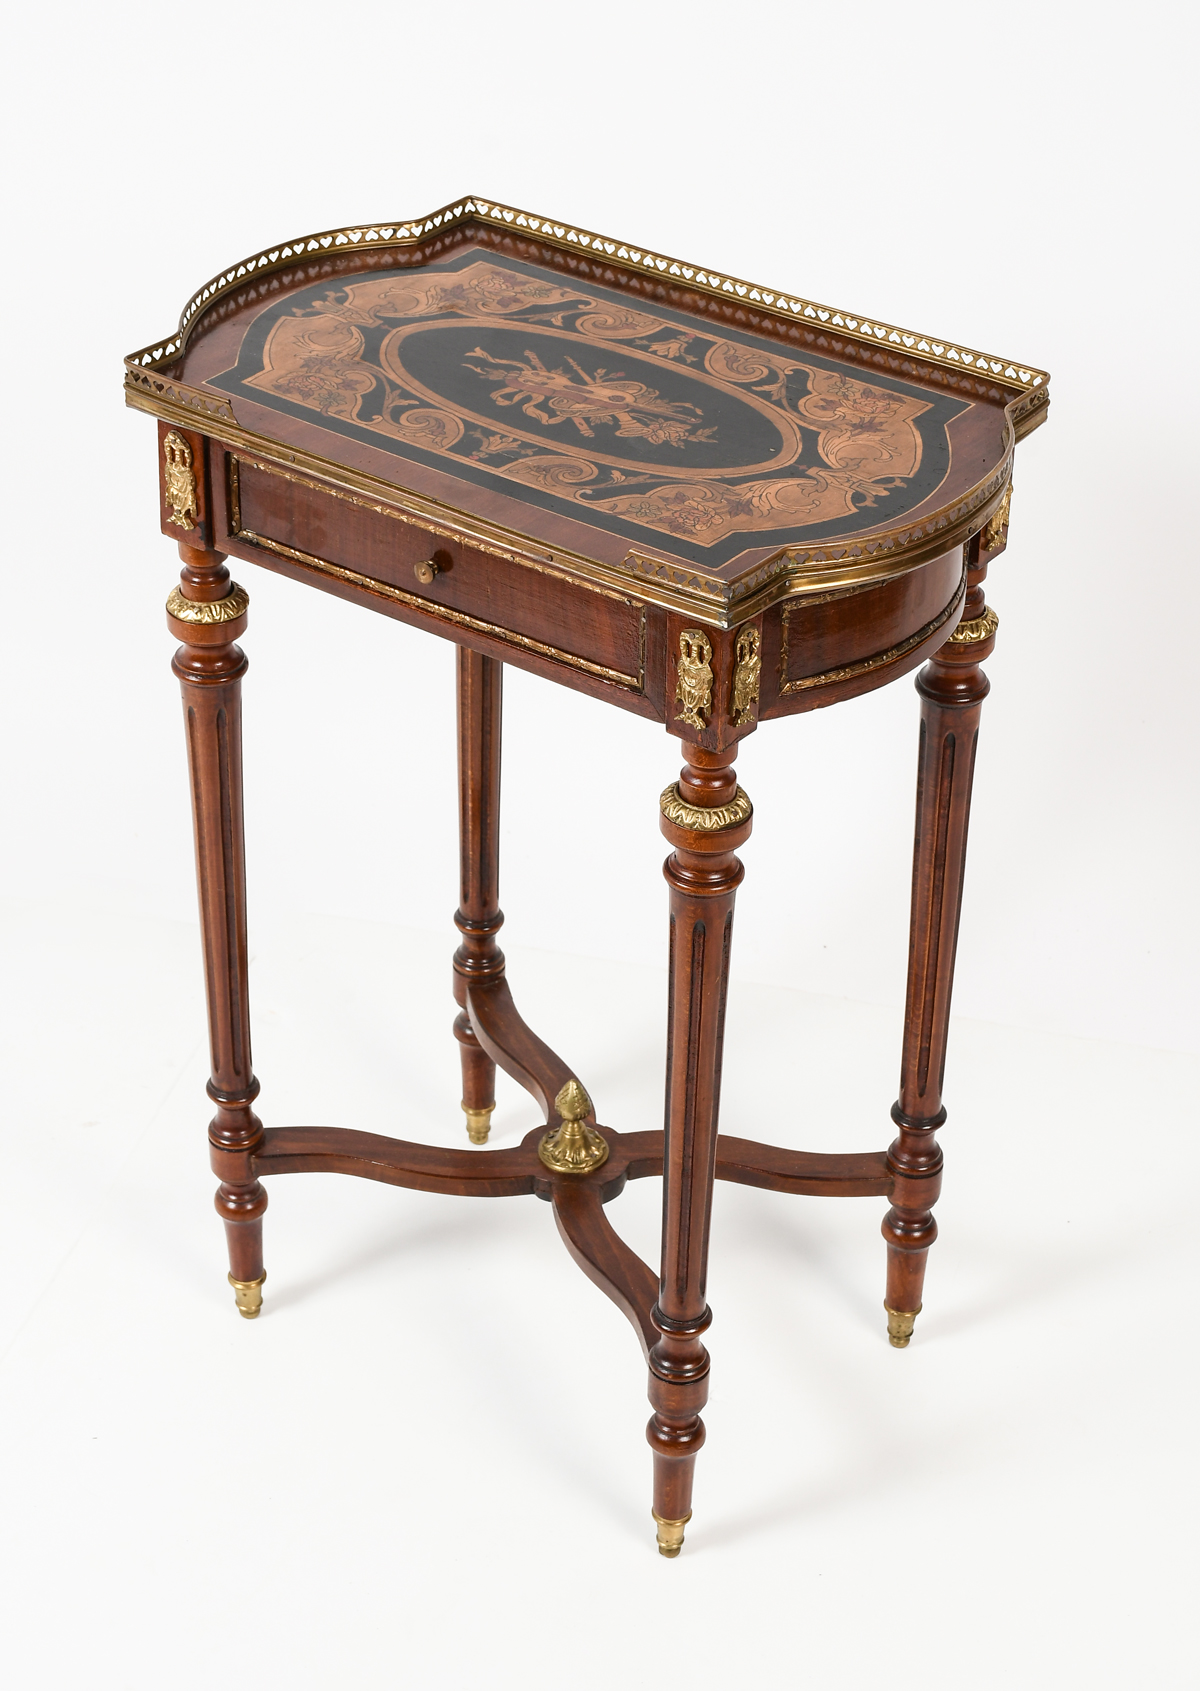 INLAID ITALIAN SIDE TABLE: Gallery